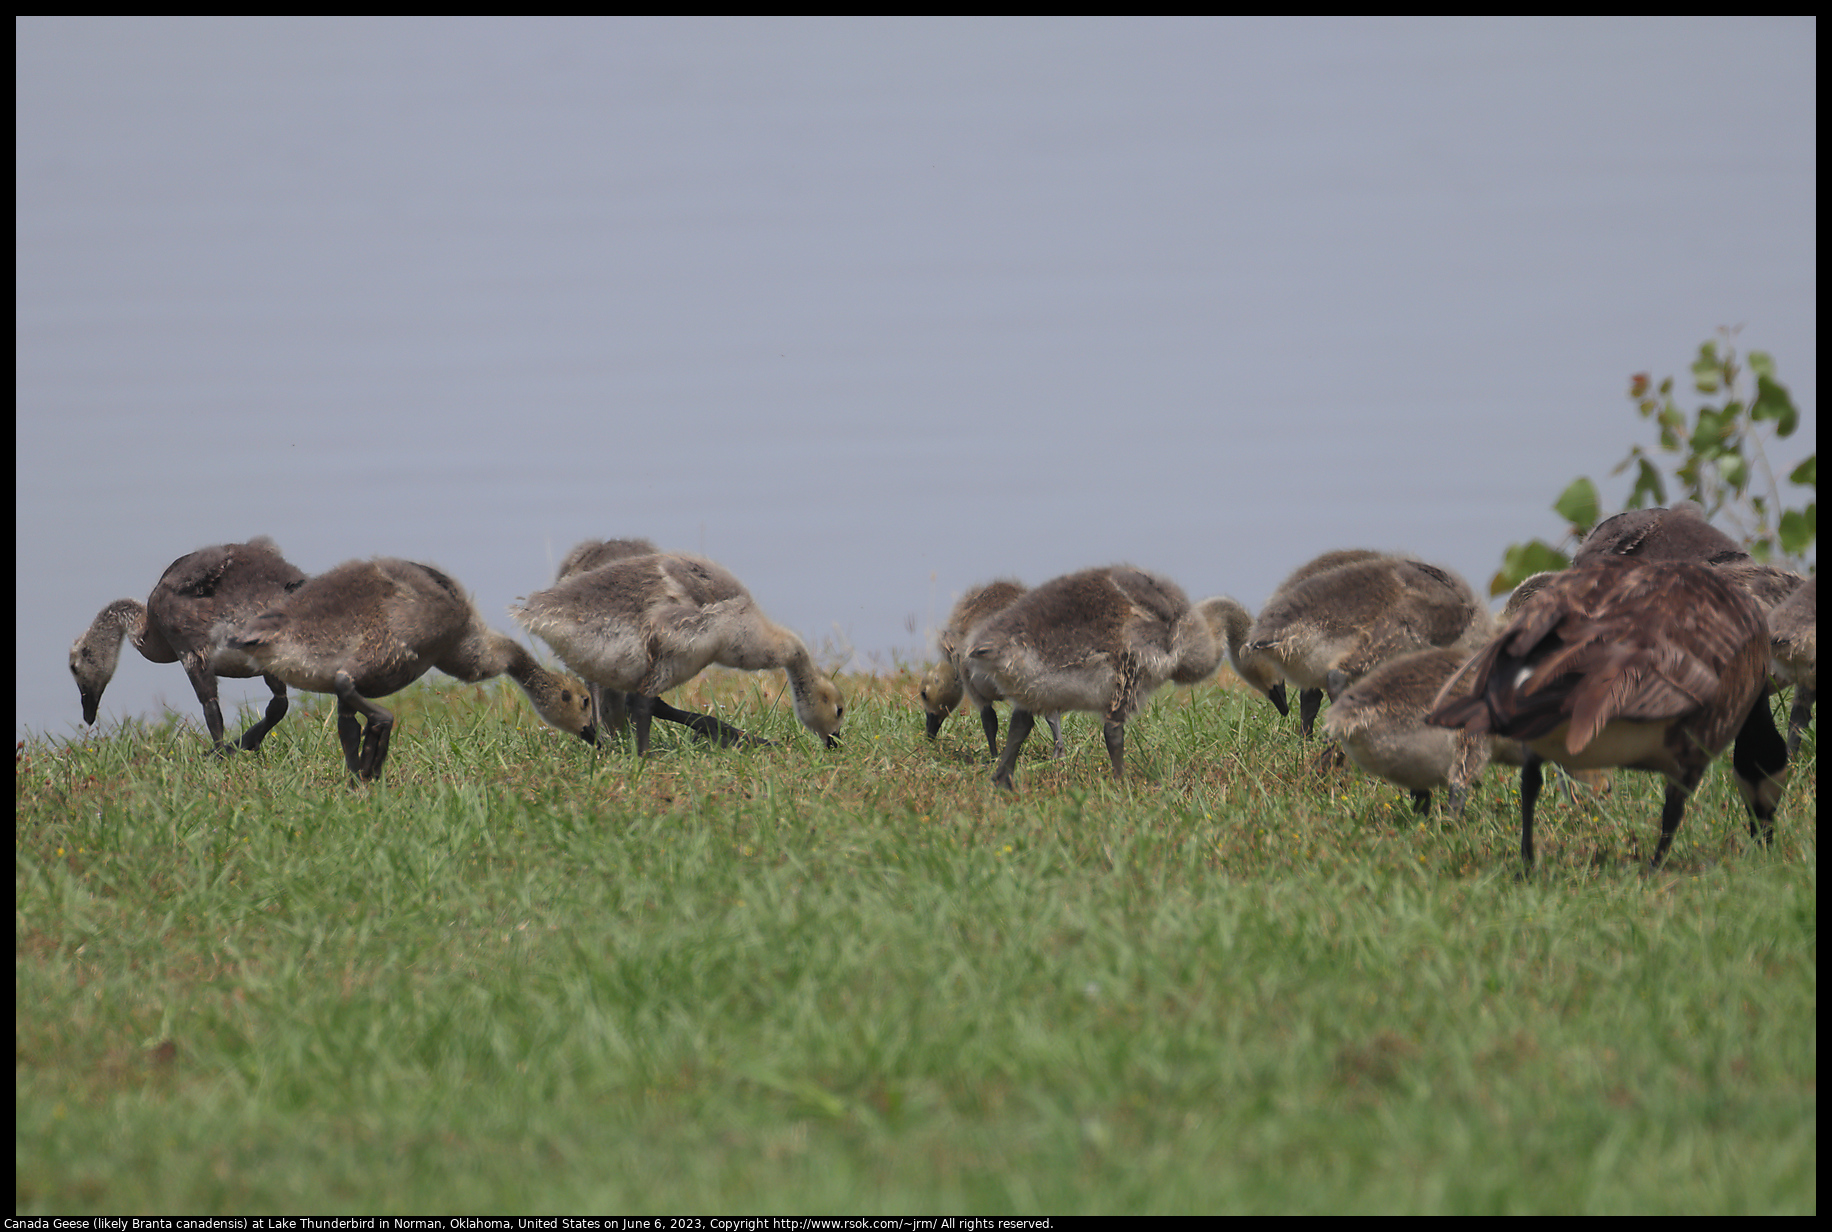 Canada Geese (likely Branta canadensis) at Lake Thunderbird in Norman, Oklahoma, United States on June 6, 2023